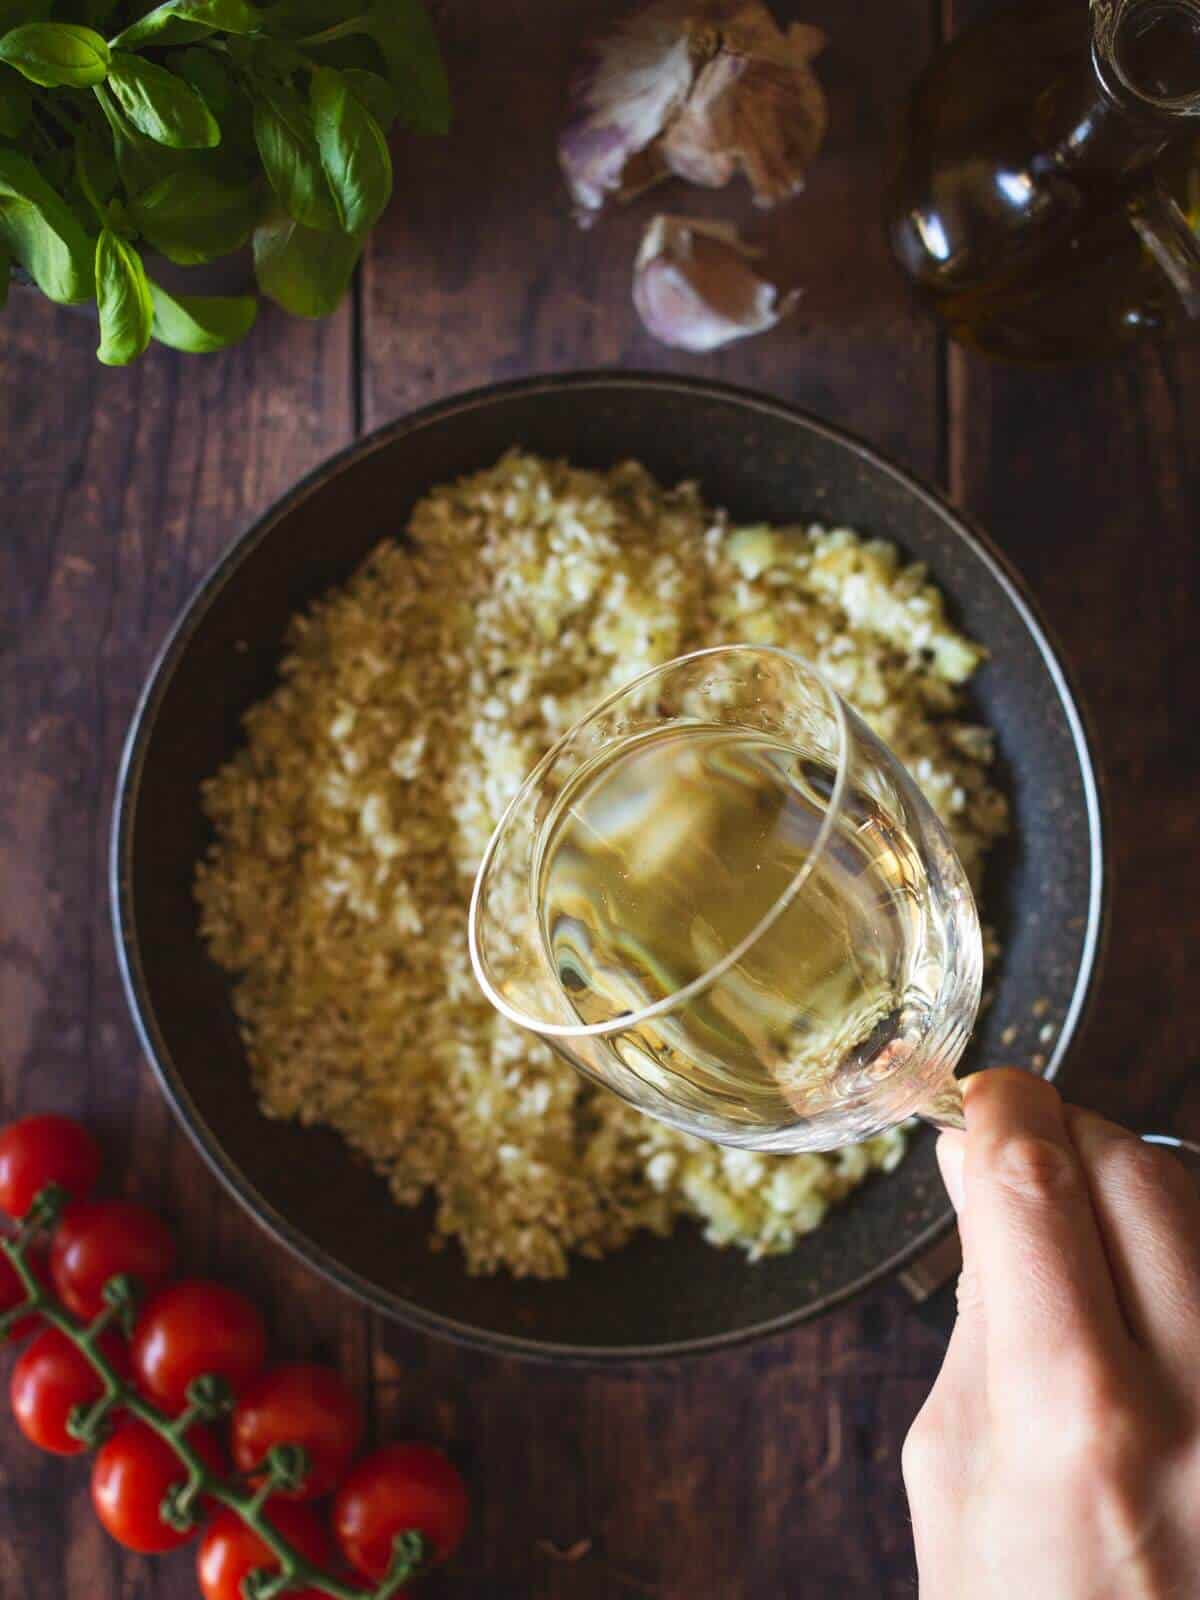 pour the white wine once the rice has dried out